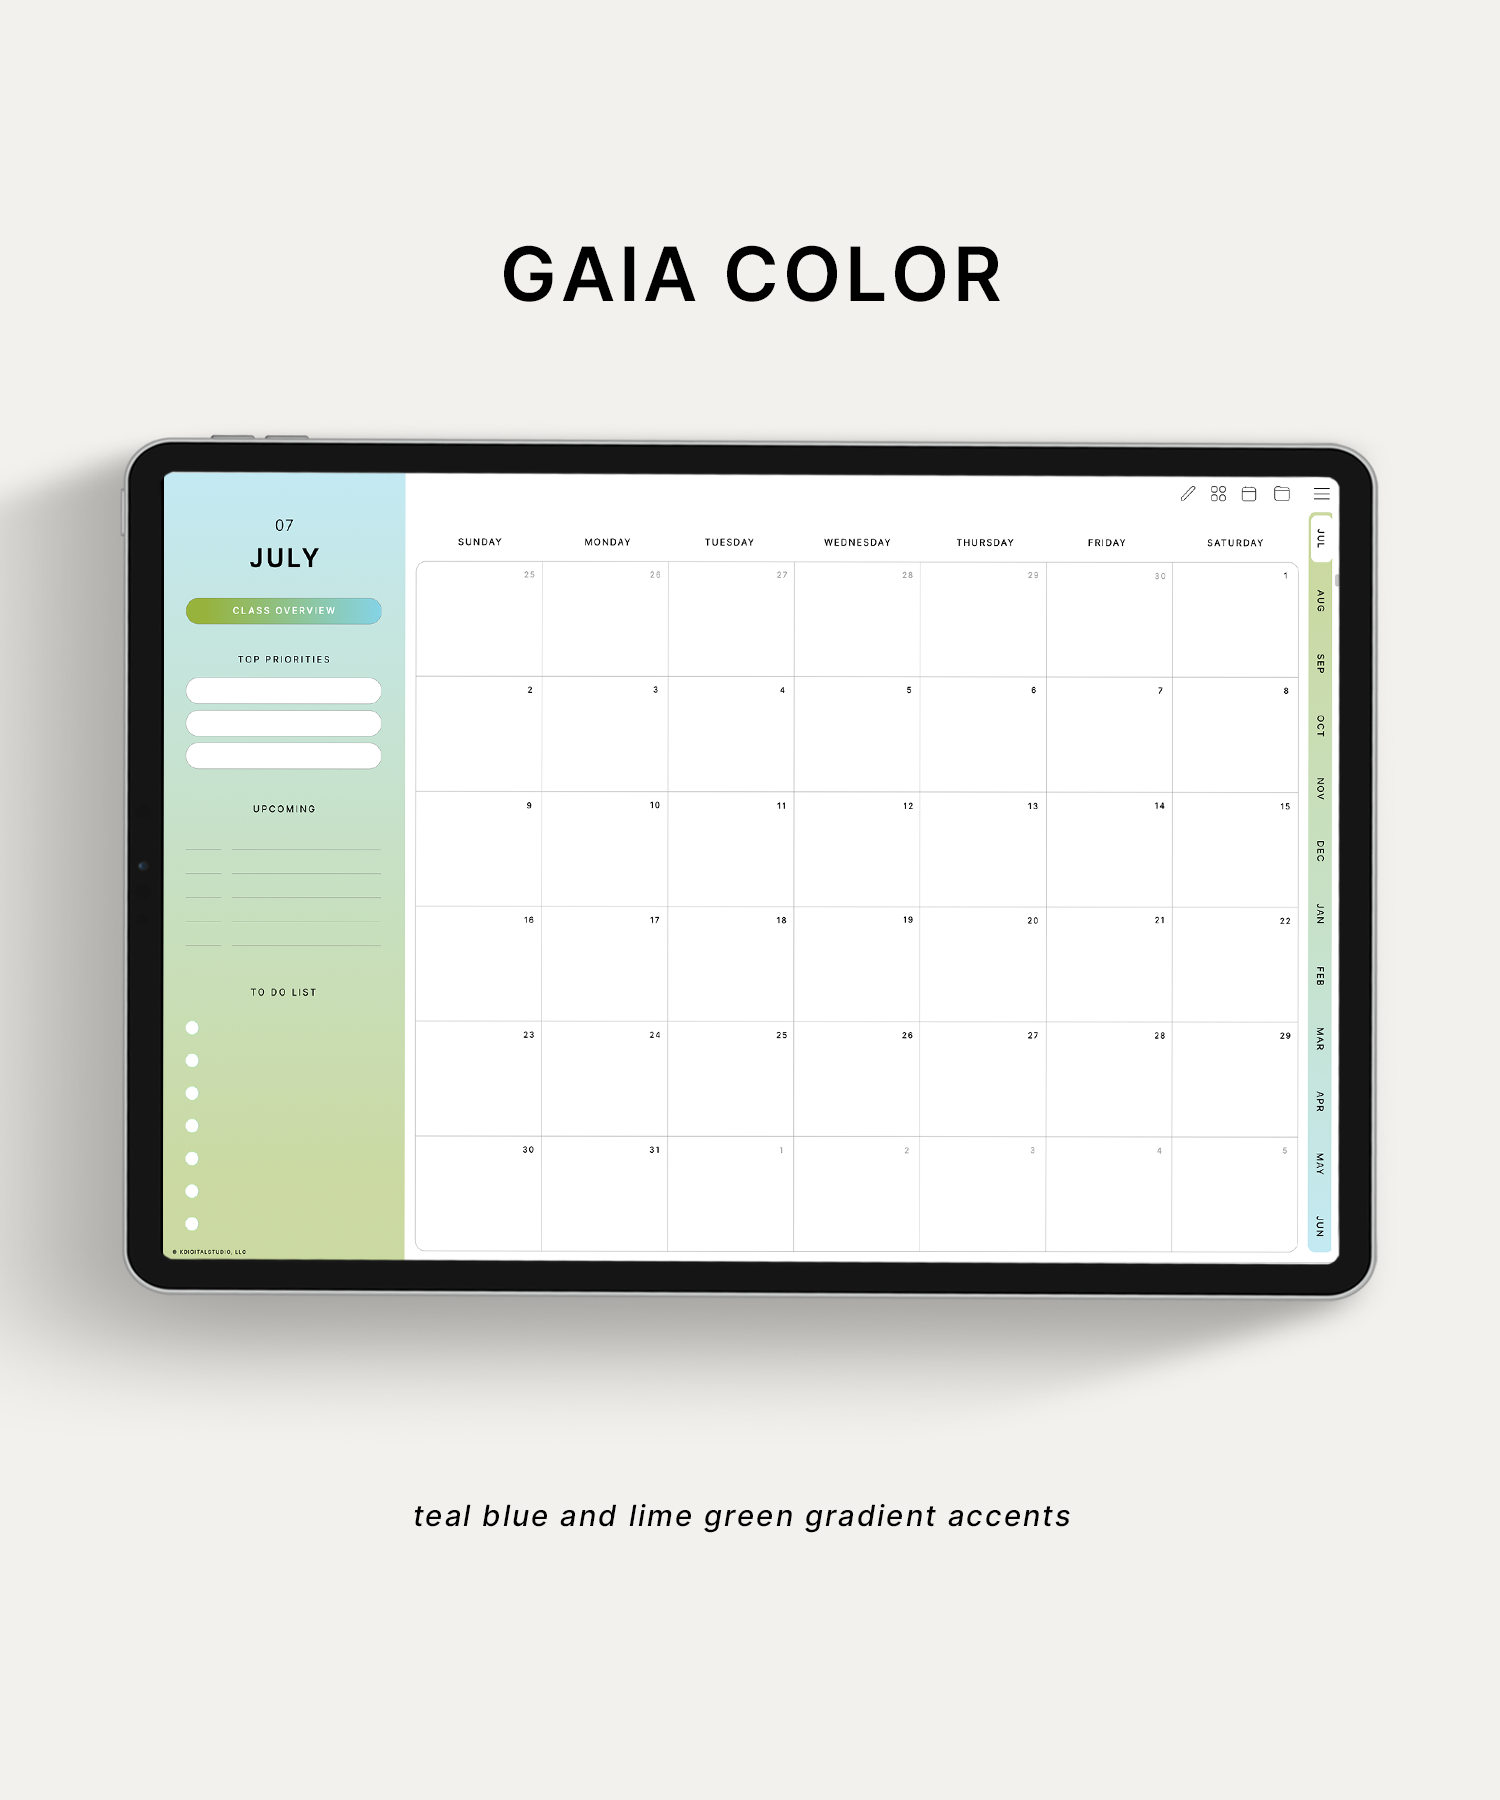 Gaia color of the academic student digital planner